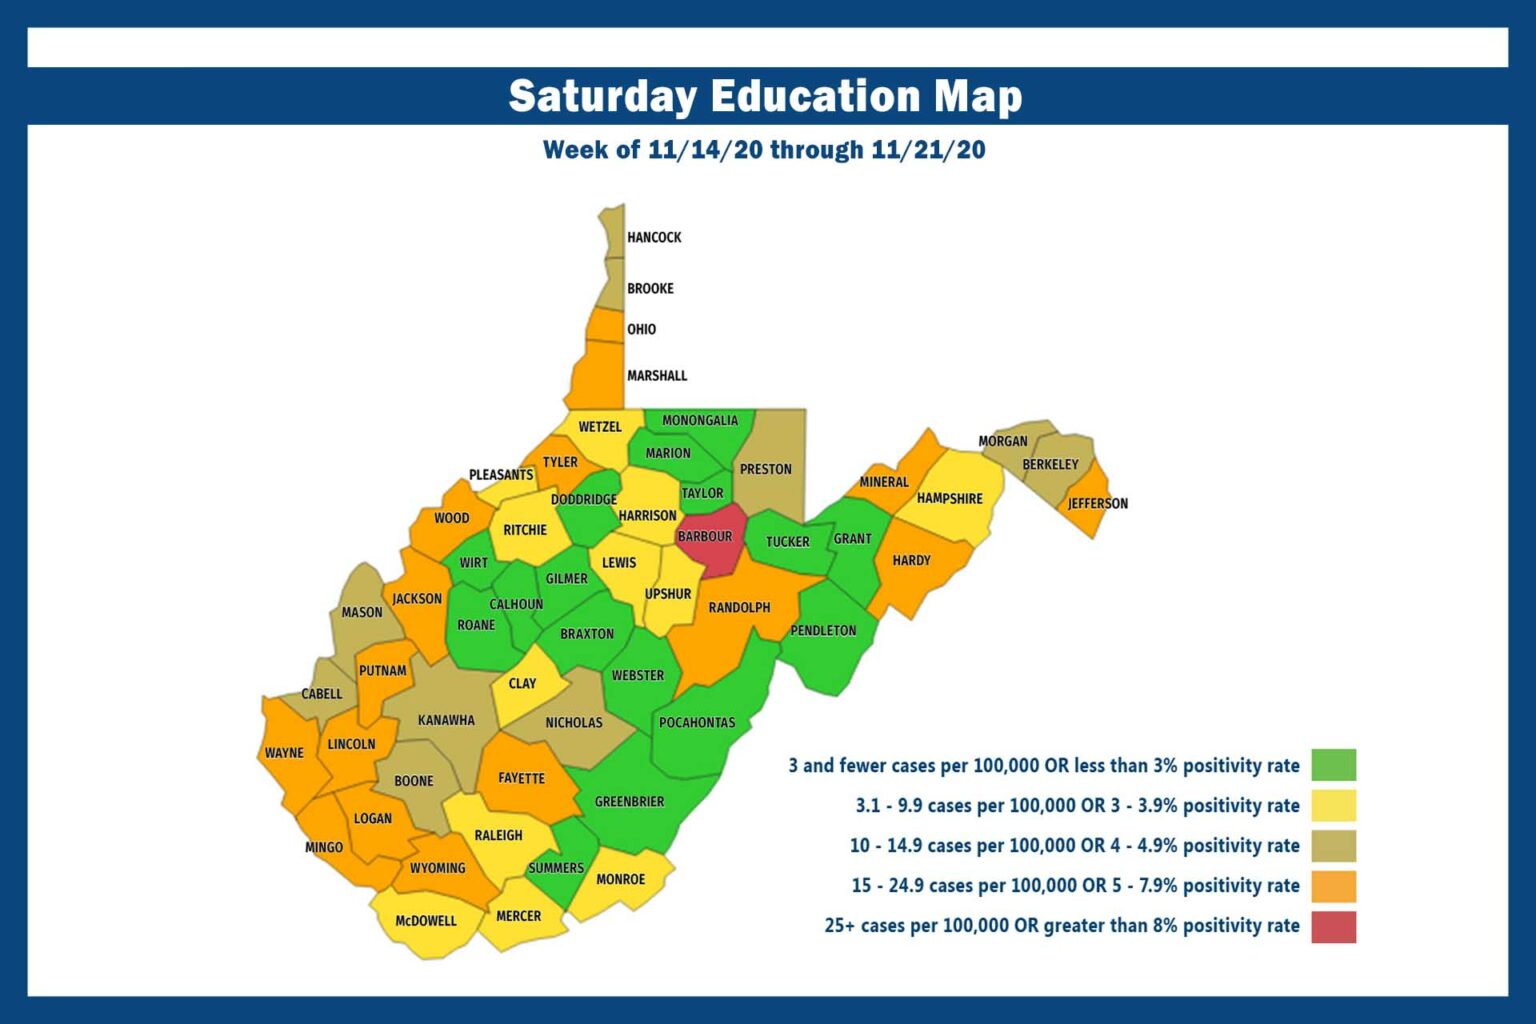 map-loophole-allows-upshur-county-schools-to-stay-open-for-now